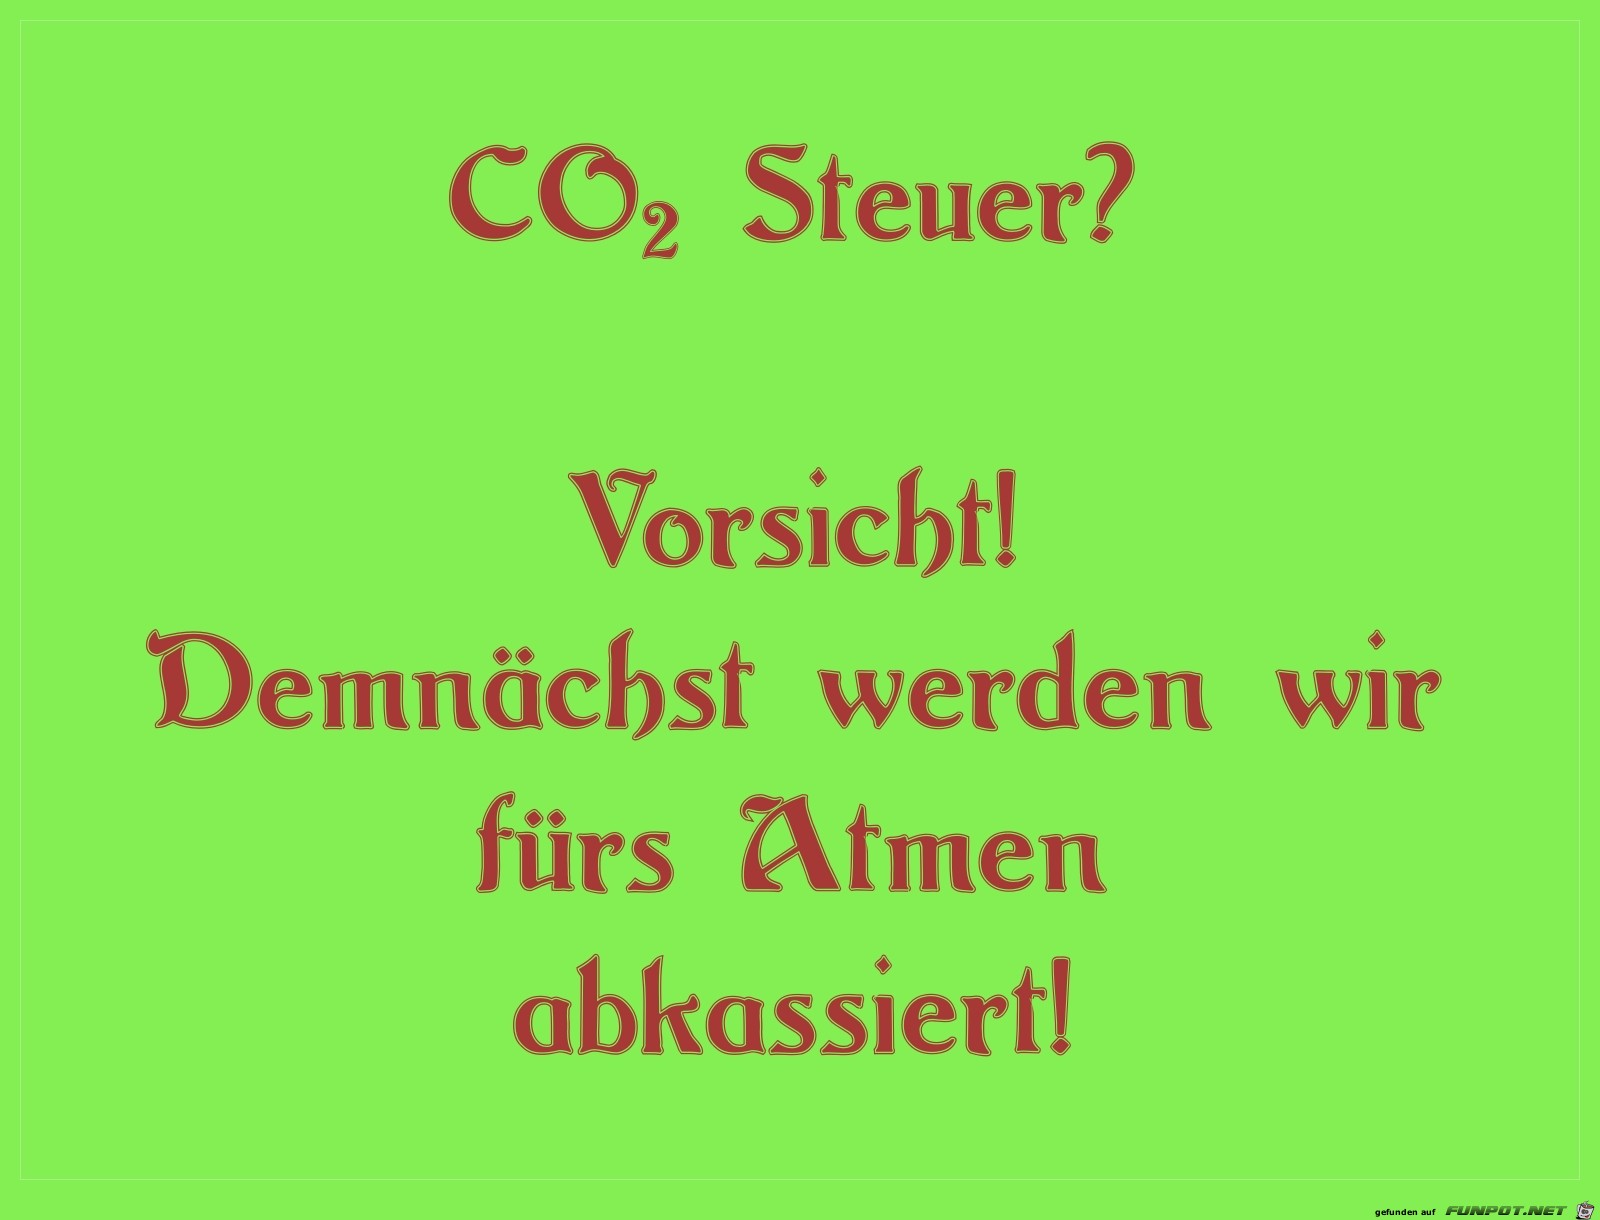 co2 steuer